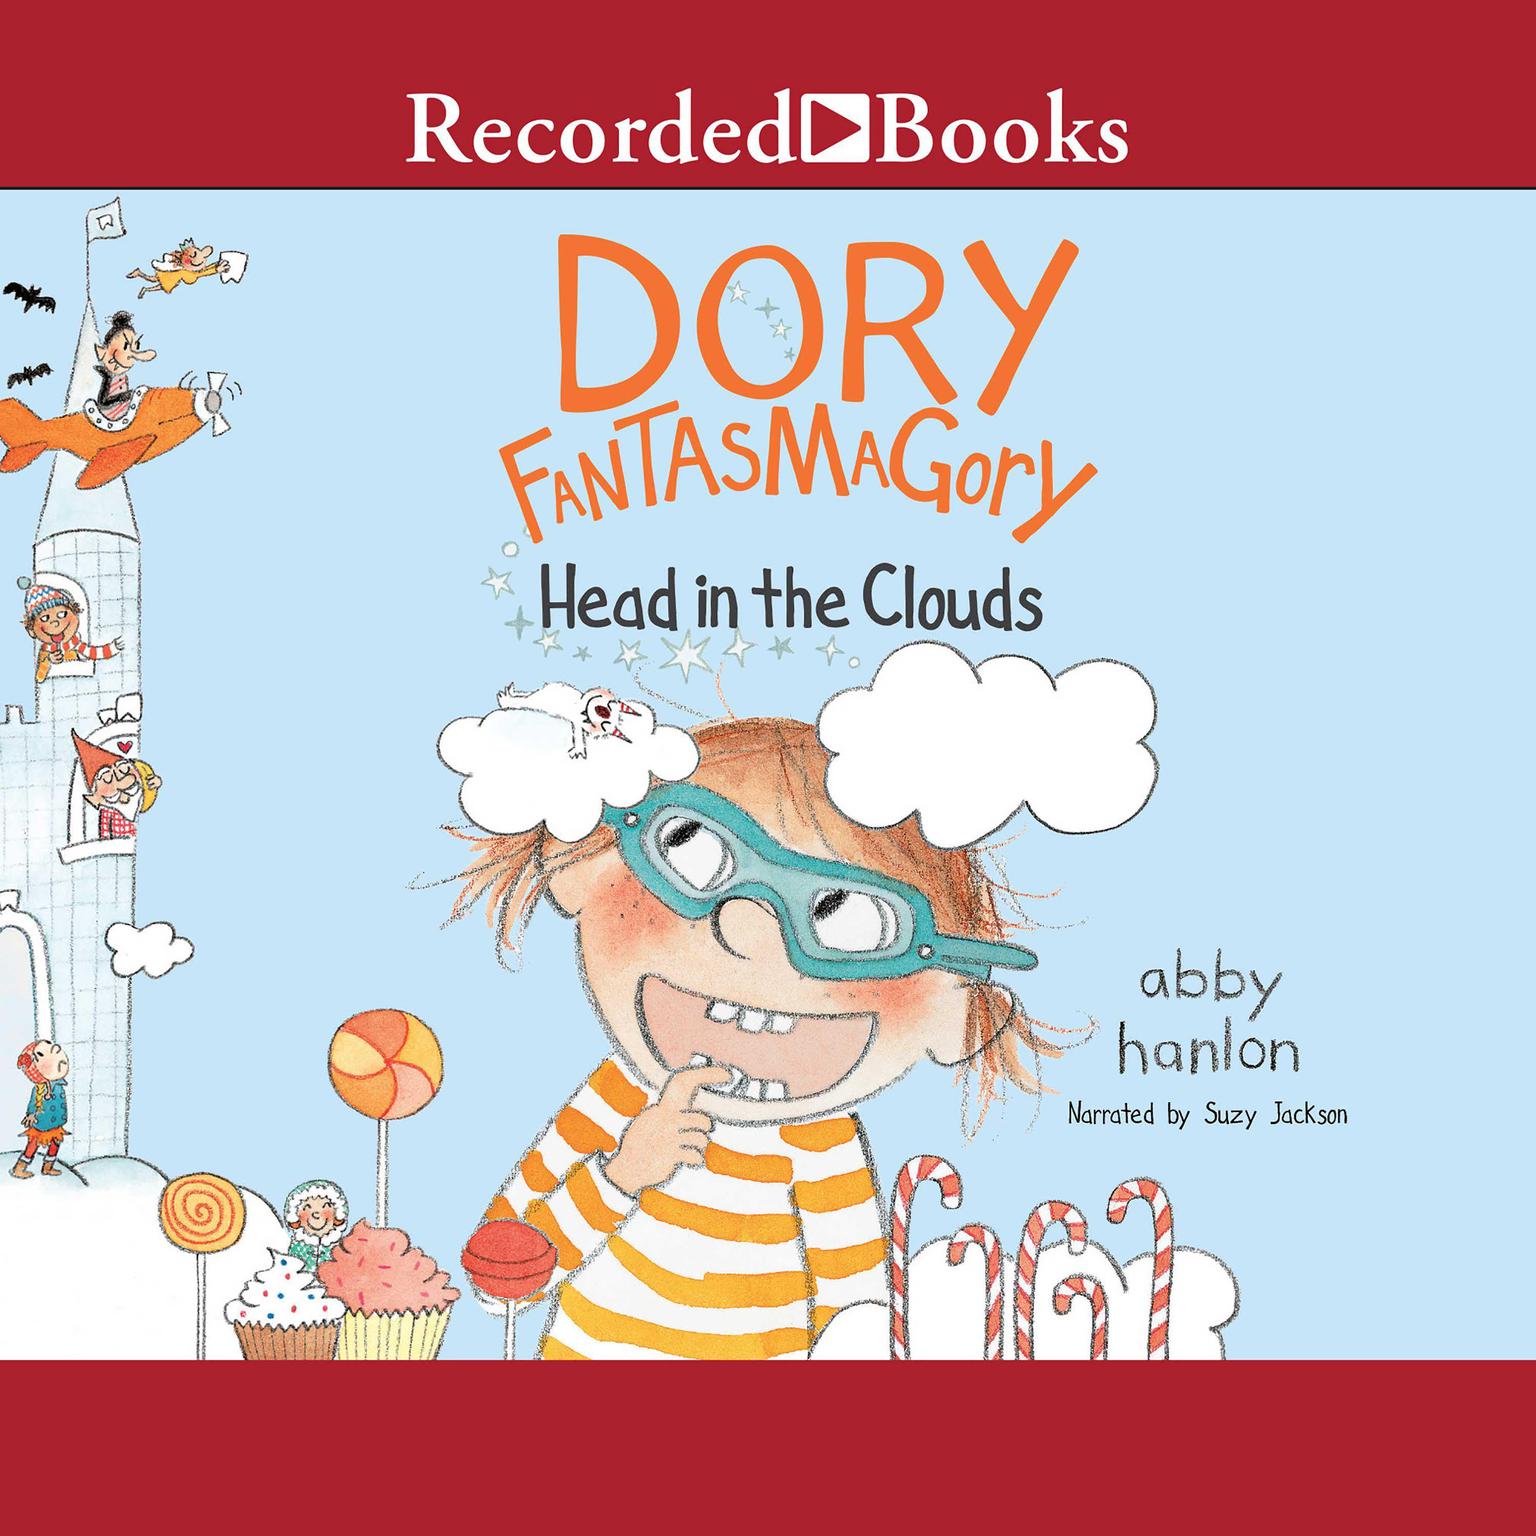 Dory Fantasmagory: Head in the Clouds: Head in the Clouds Audiobook, by Abby Hanlon